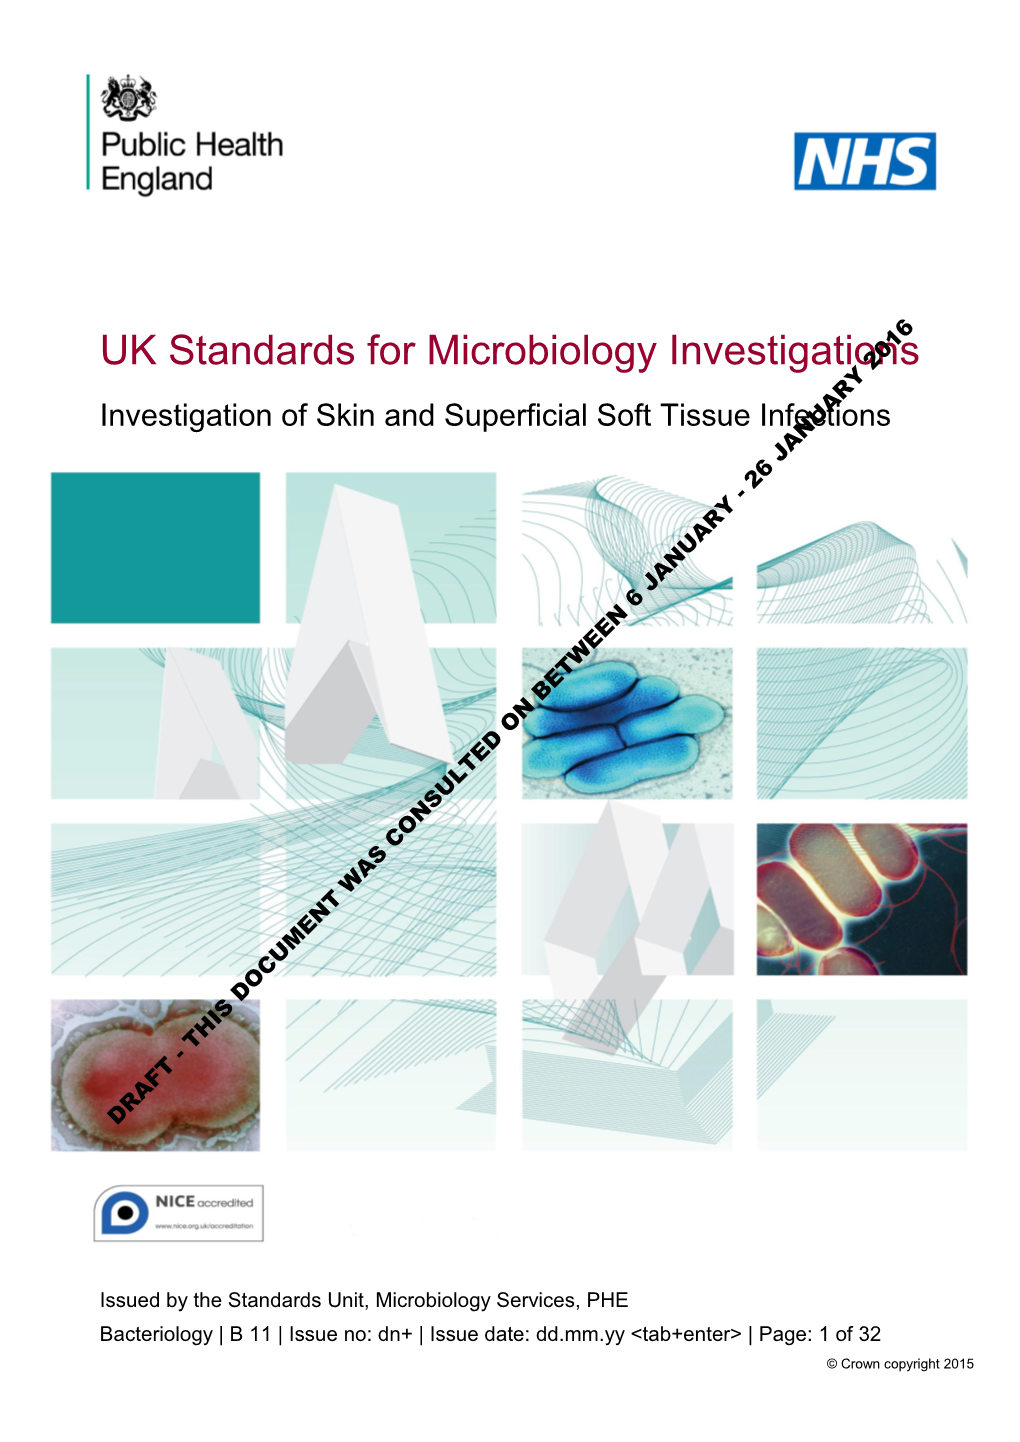 Investigation of Skin and Superficial Soft Tissue Infections